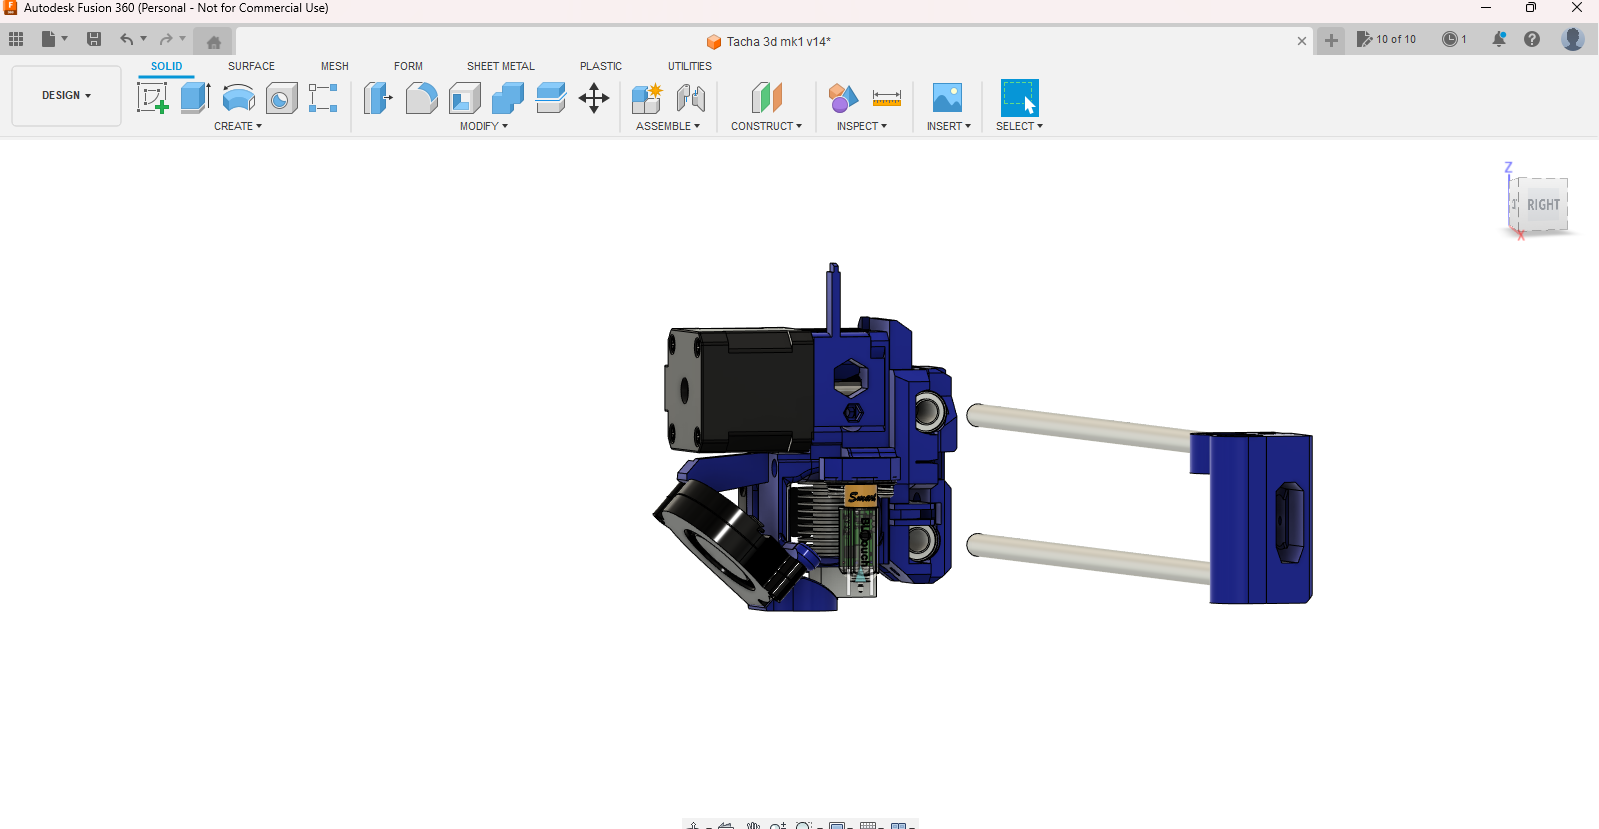 Autodesk Fusion 360 (Personal - Not for Commercial Use) 6_30_2023 9_04_16 PM.png